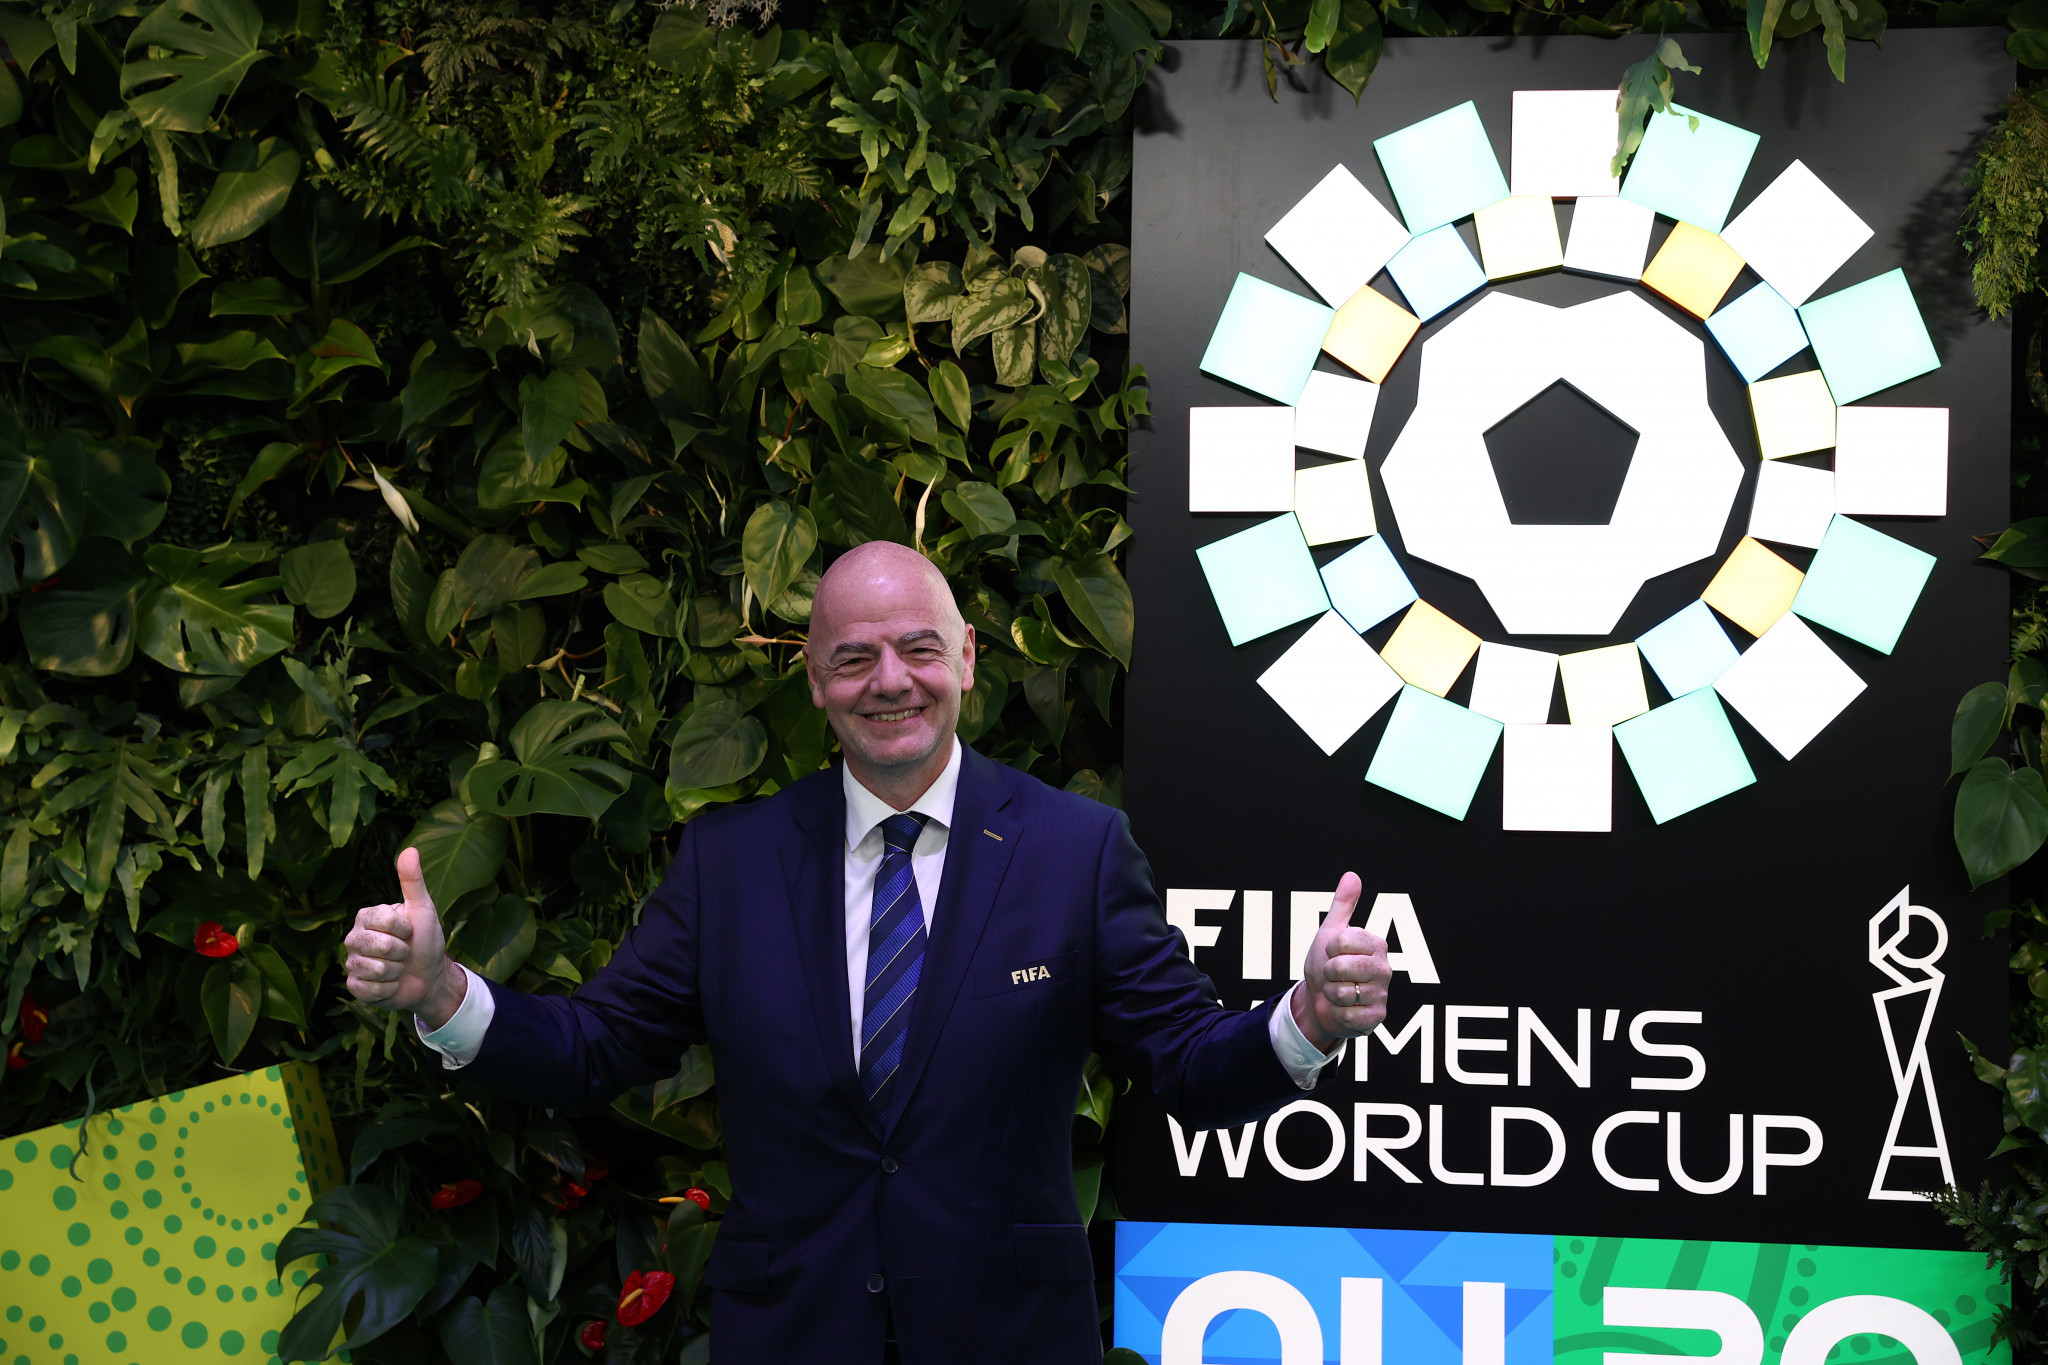 The Oceania Football Confederation has backed Gianni Infantino's bid for re-election as FIFA President ©Getty Images